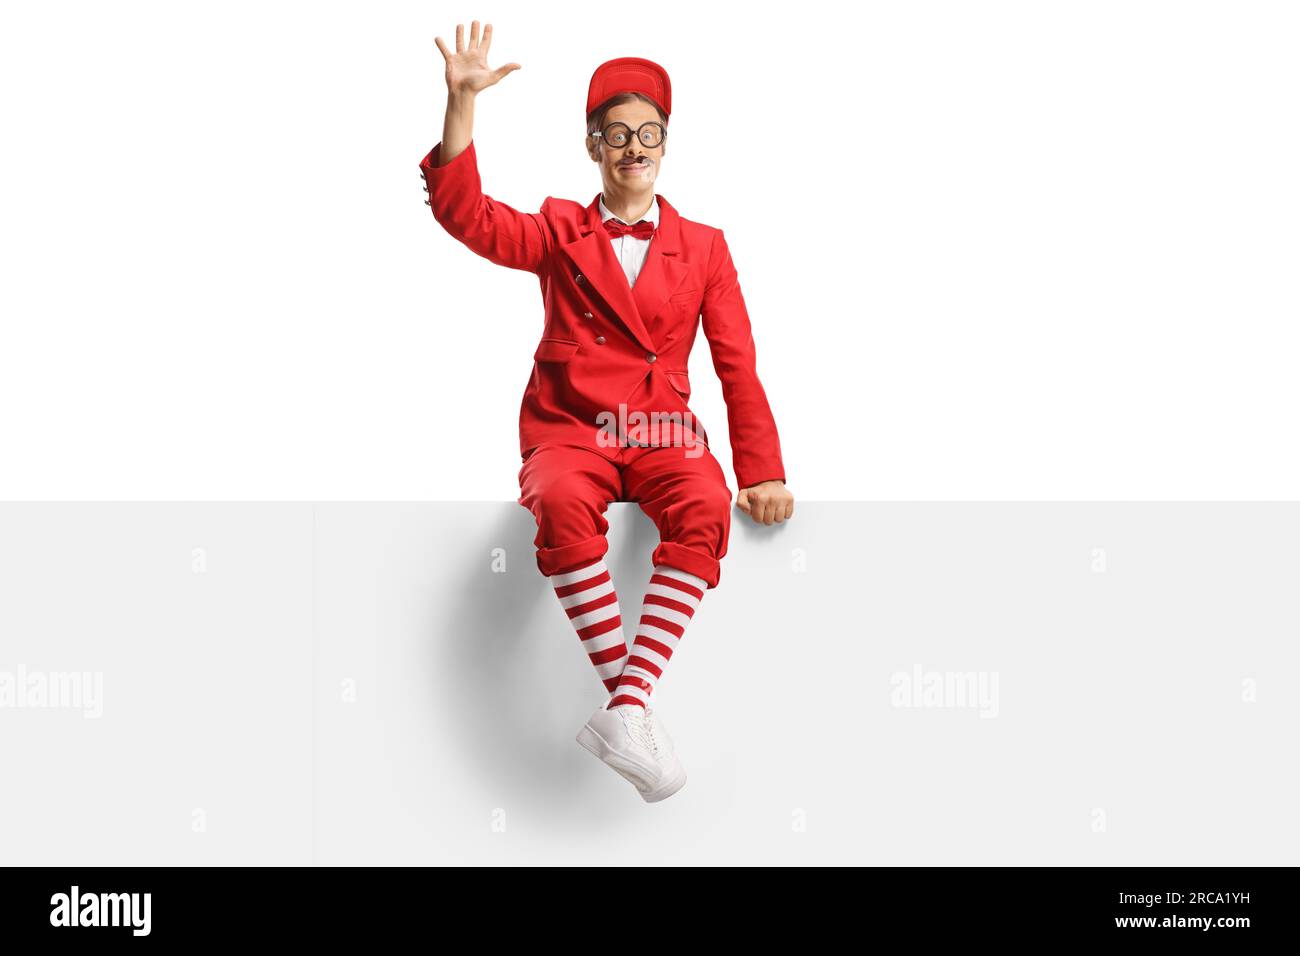 Entertainer in red suit sitting on a blank panel and waving isolated on white background Stock Photo